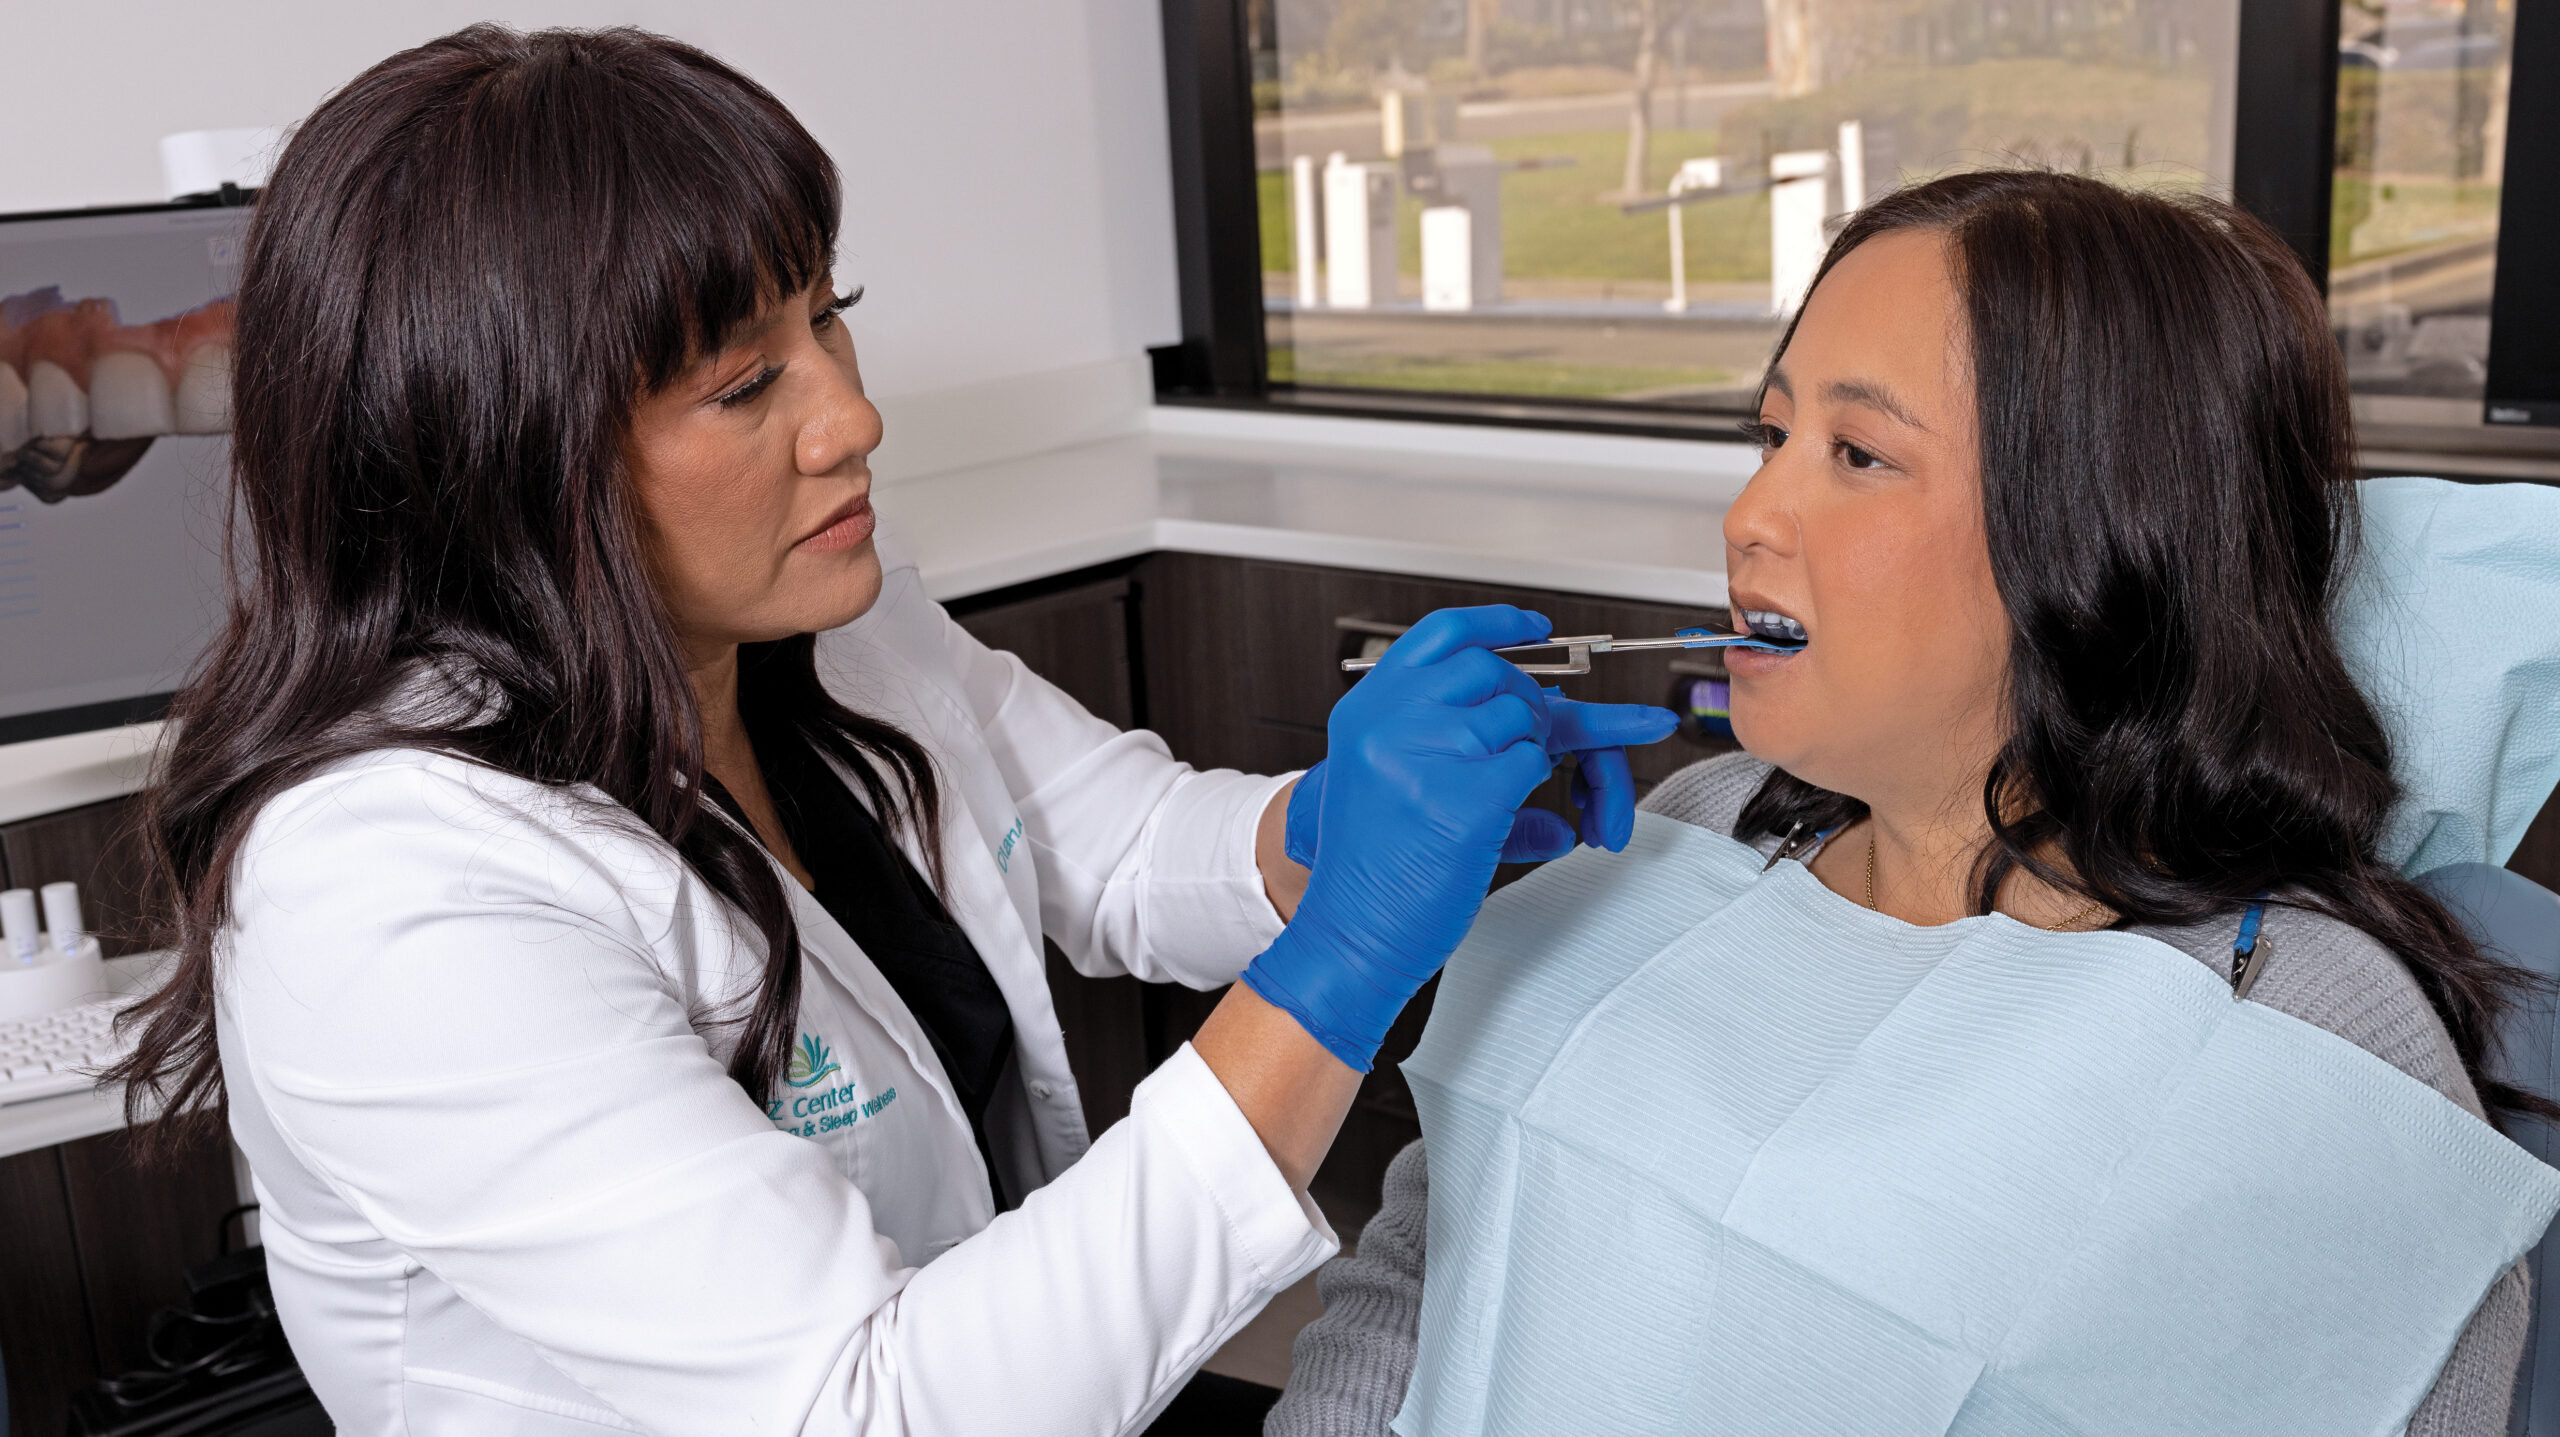 Dr. Diana Batoon working with a patient during a procedure